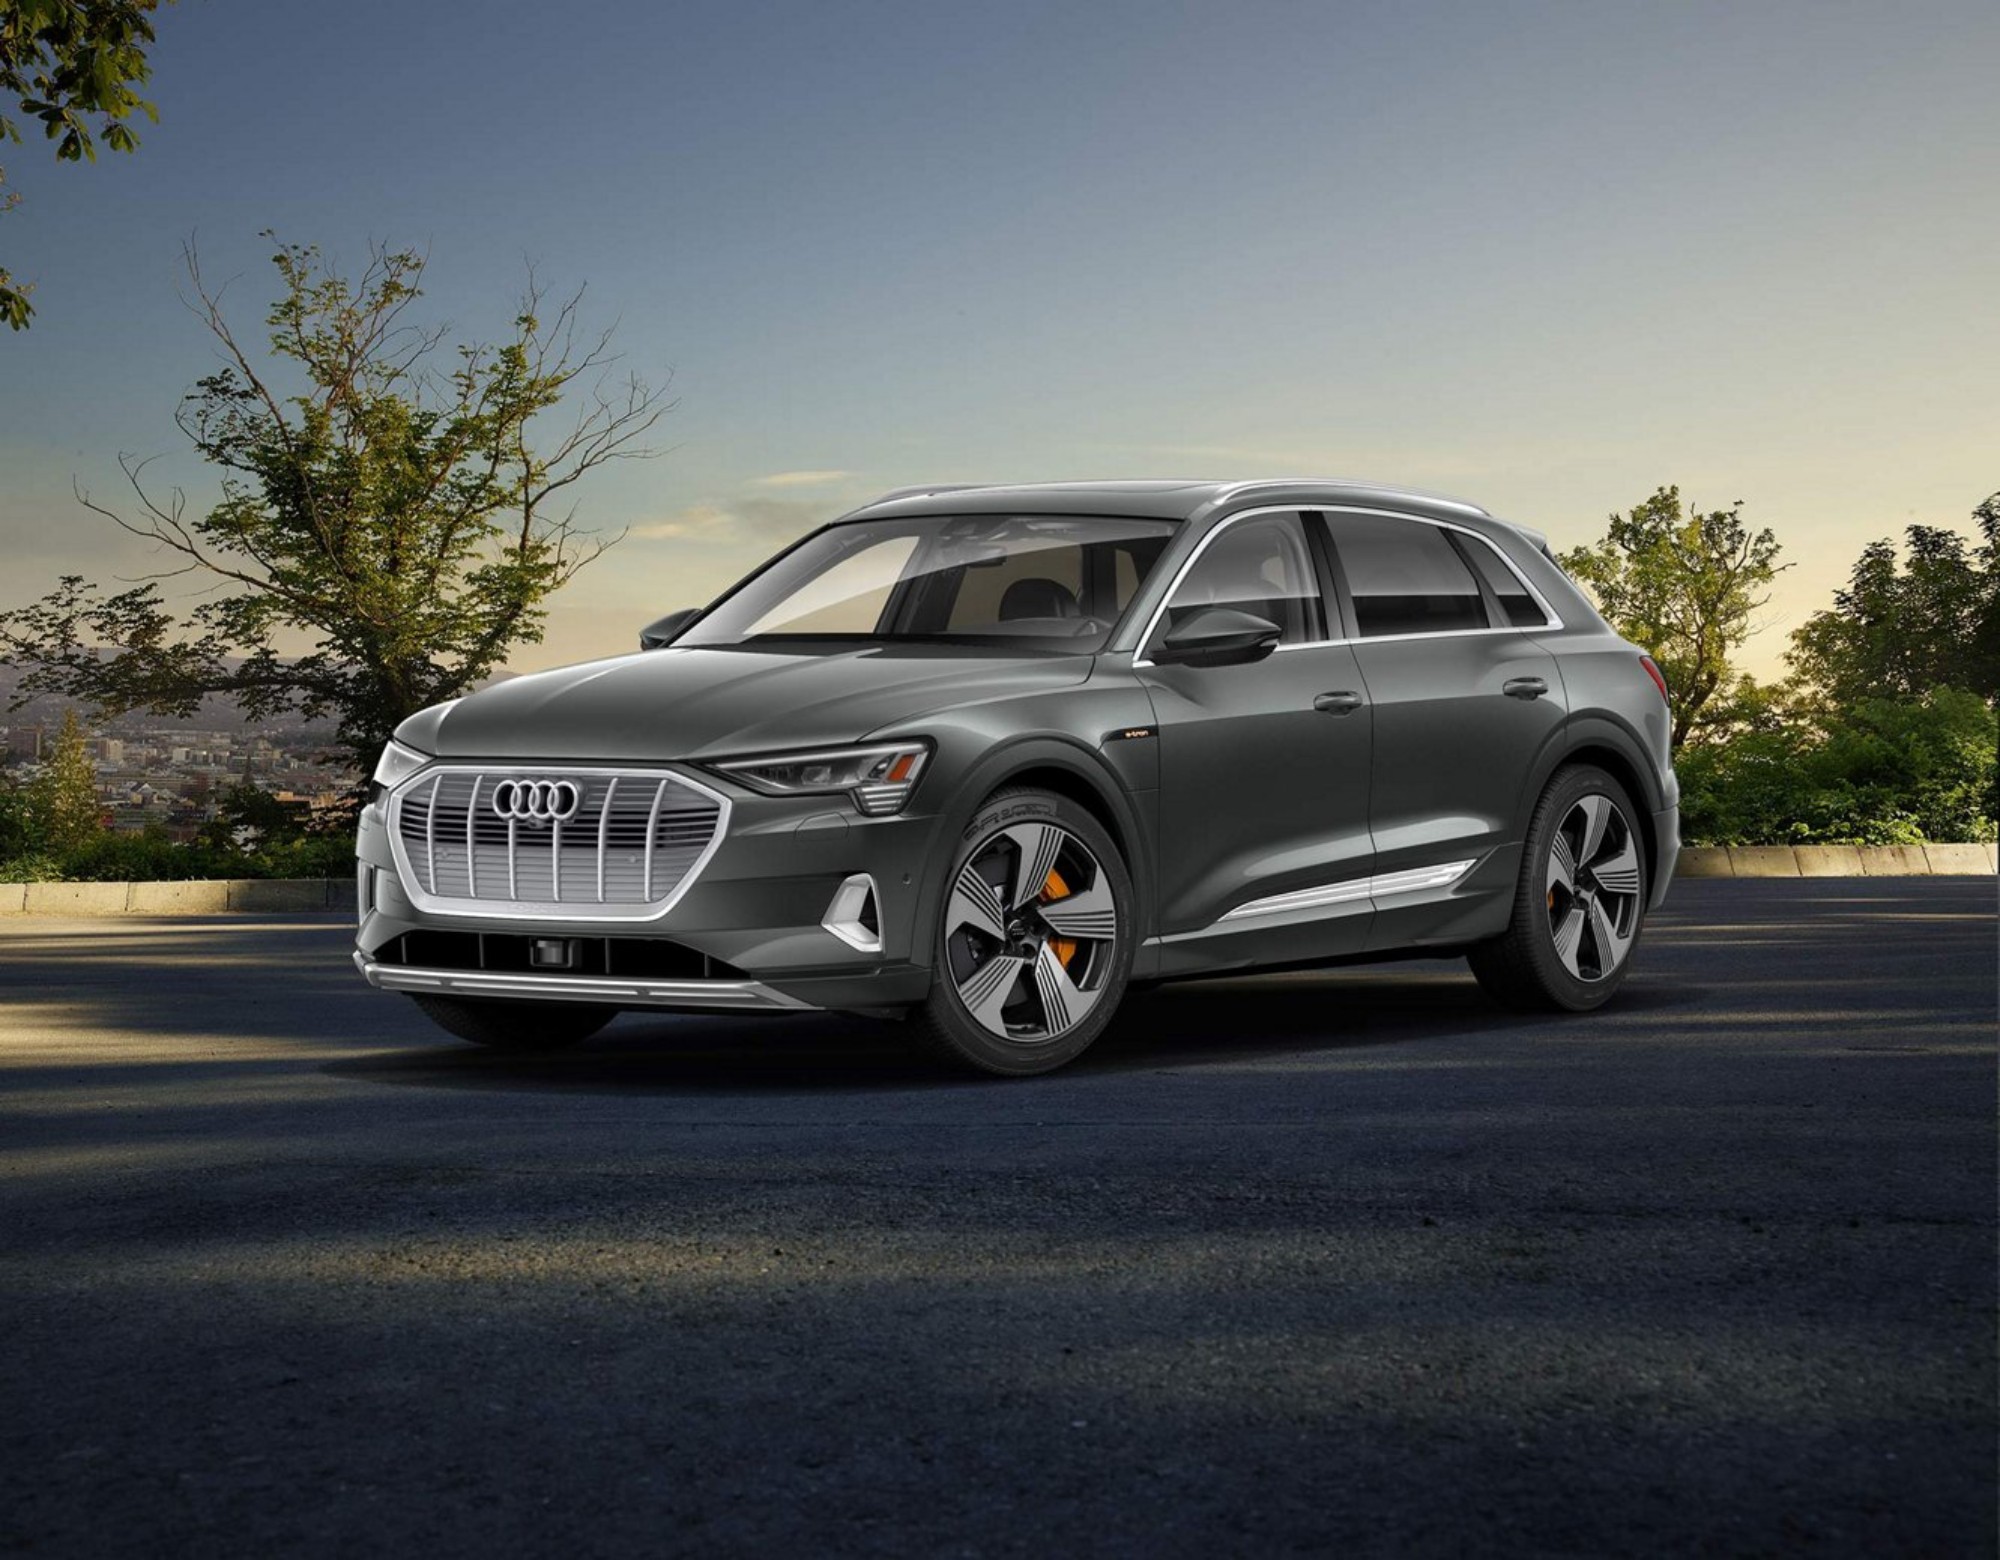 electric goes audi all electric audi e tron suv unveiled and available for us customers to place reservations